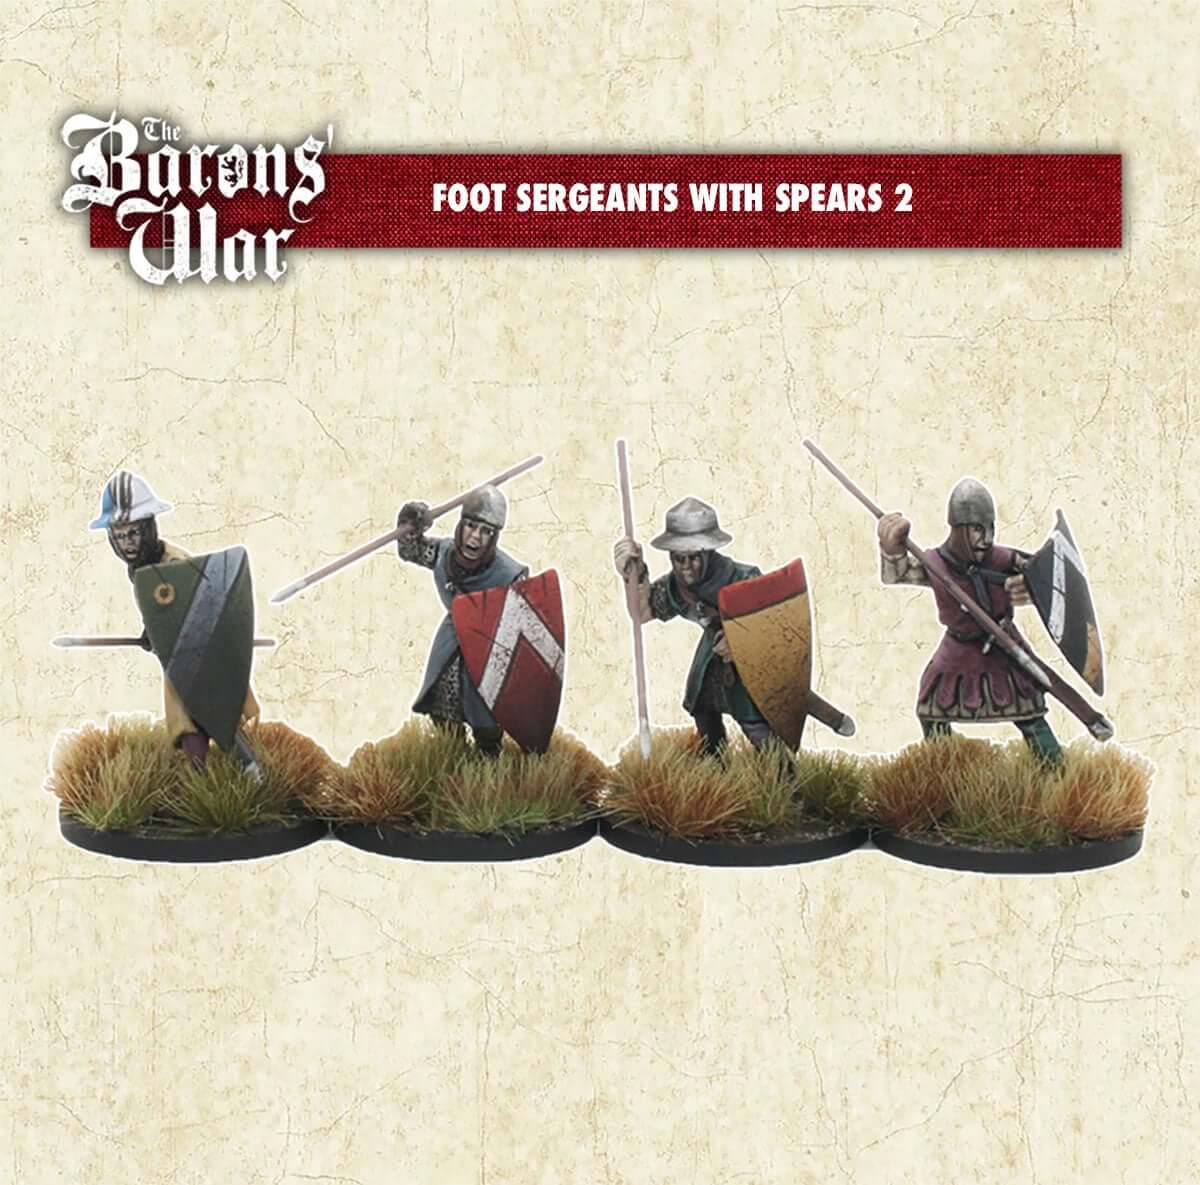 Baron's War Foot Sergeants with Spears 2 28mm historical miniatures